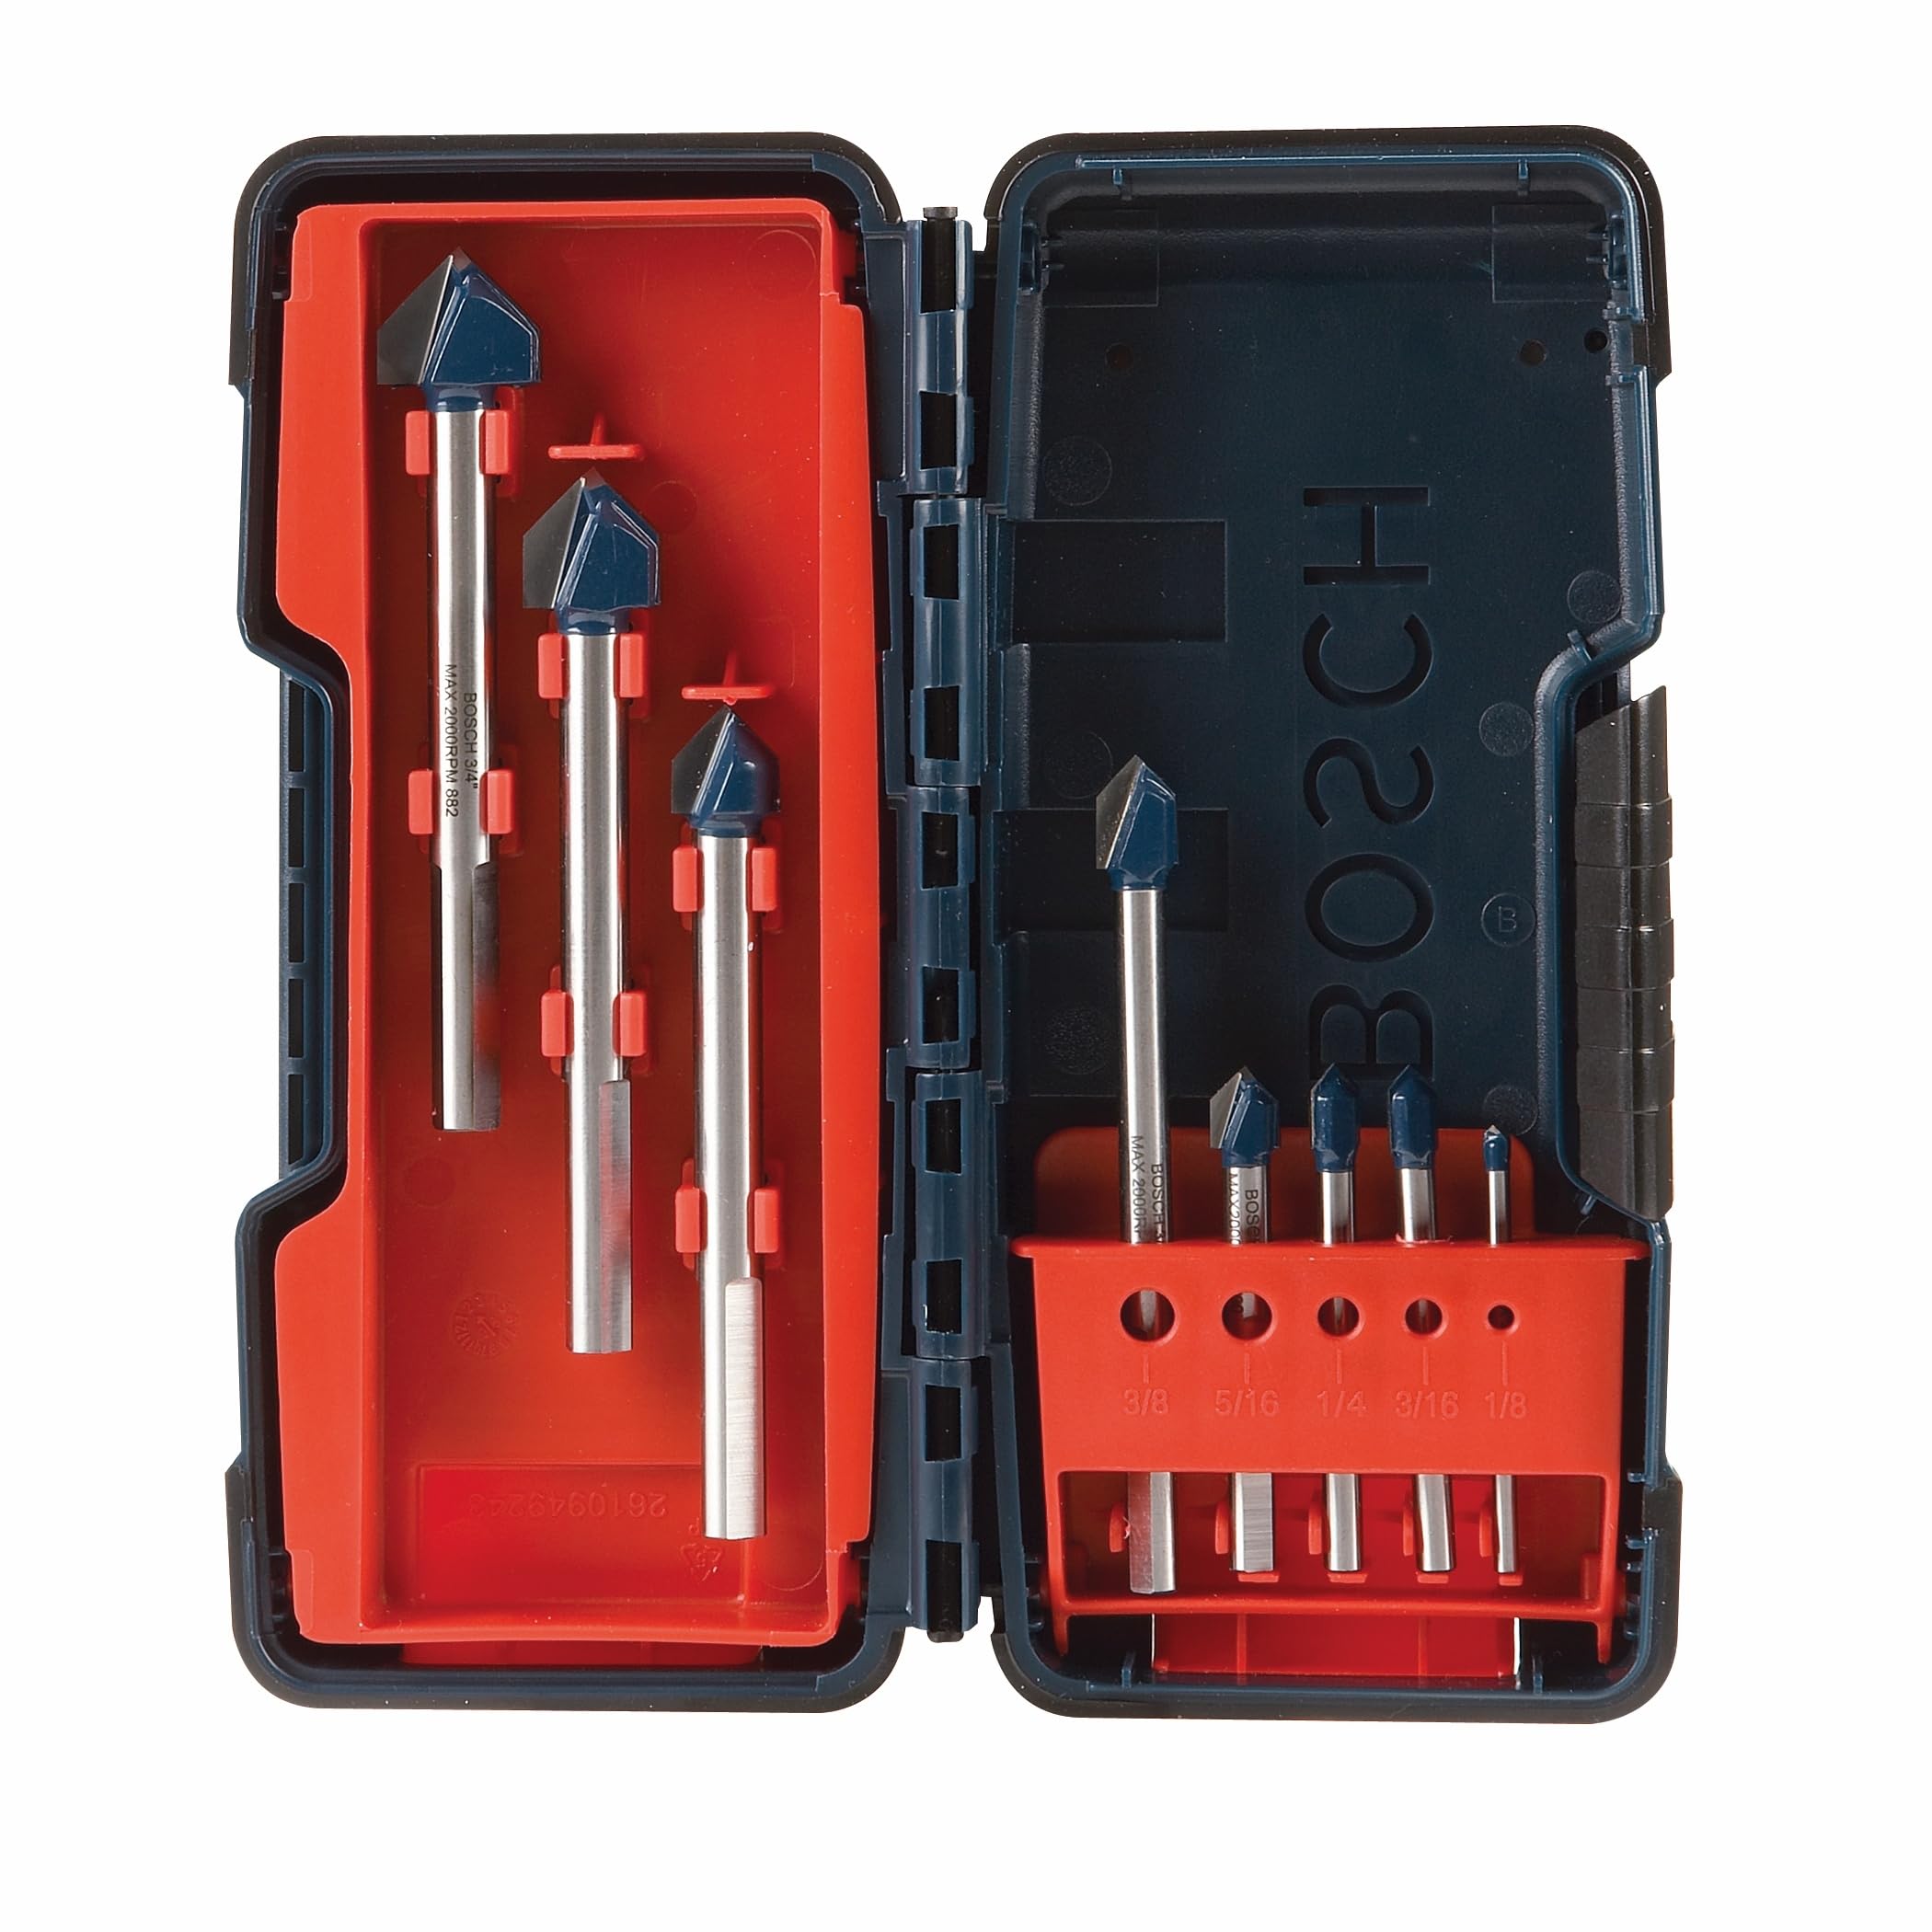 BOSCH GT3000 8-Piece Glass and Tile Carbide Hammer Drill Bits $20.20 @Amazon